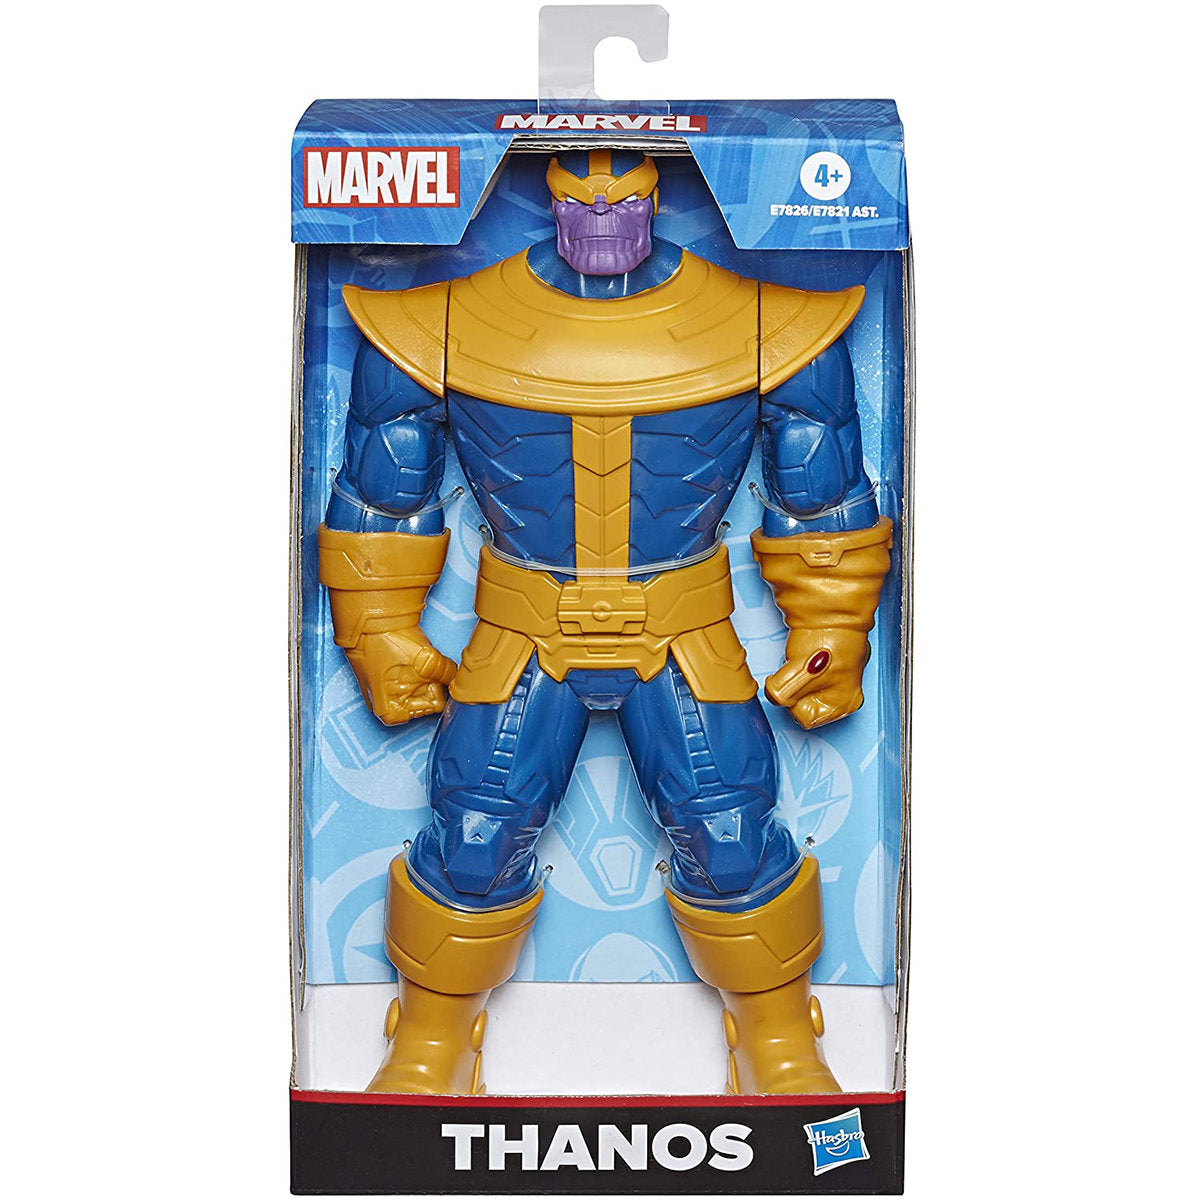 Marvel Olympus Thanos Toy 9.5in Collectible Super Hero Action Figure